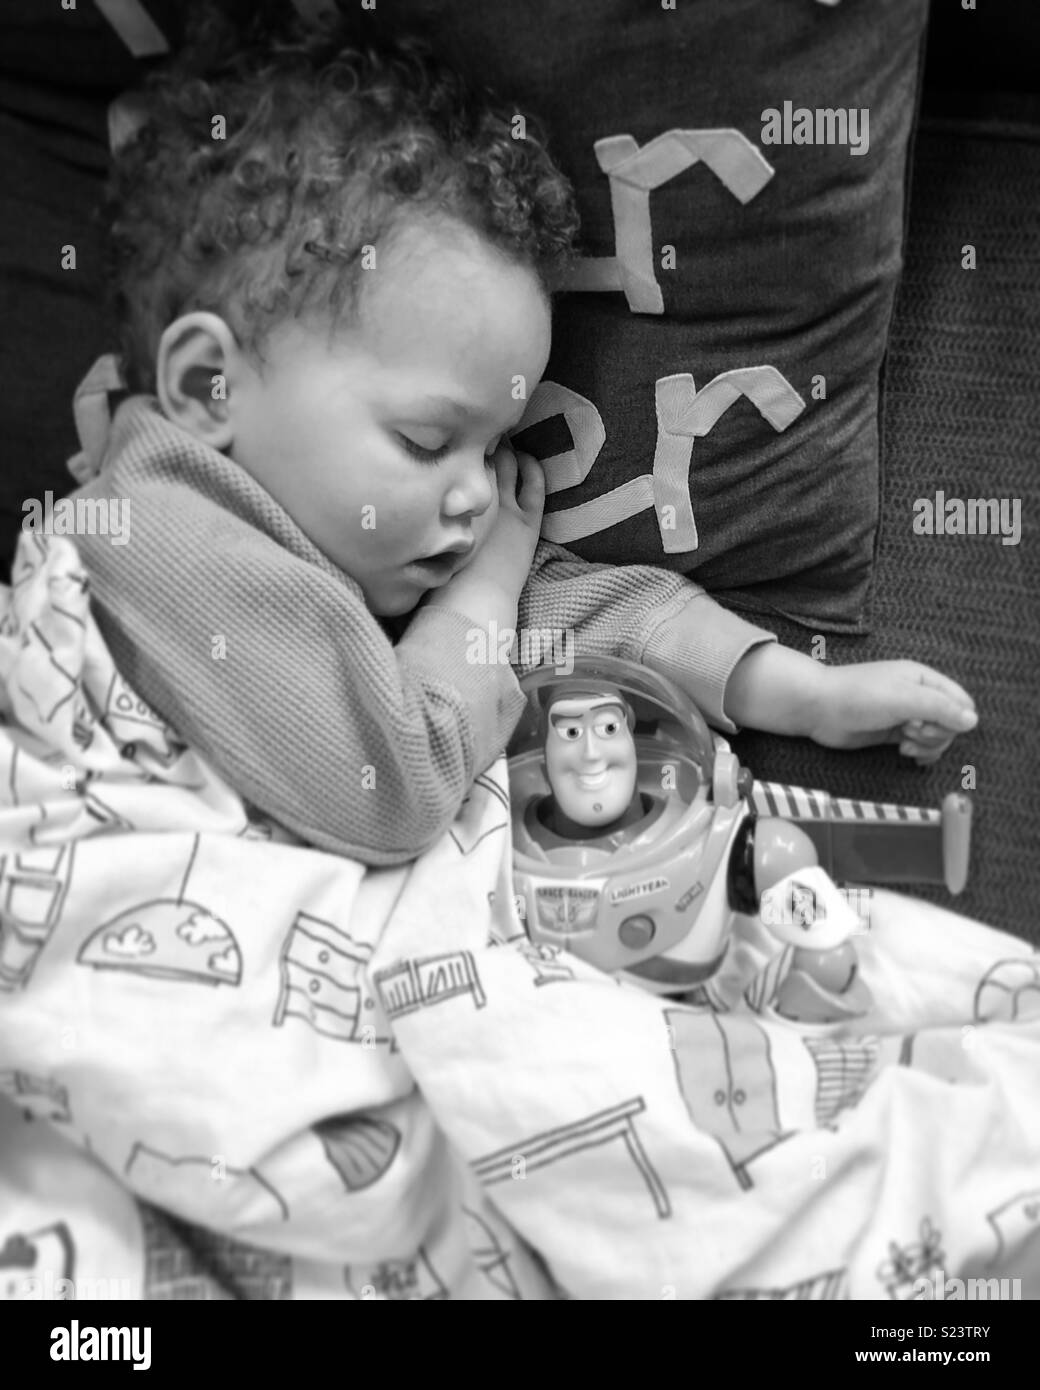 Napping baby with Buzz Stock Photo